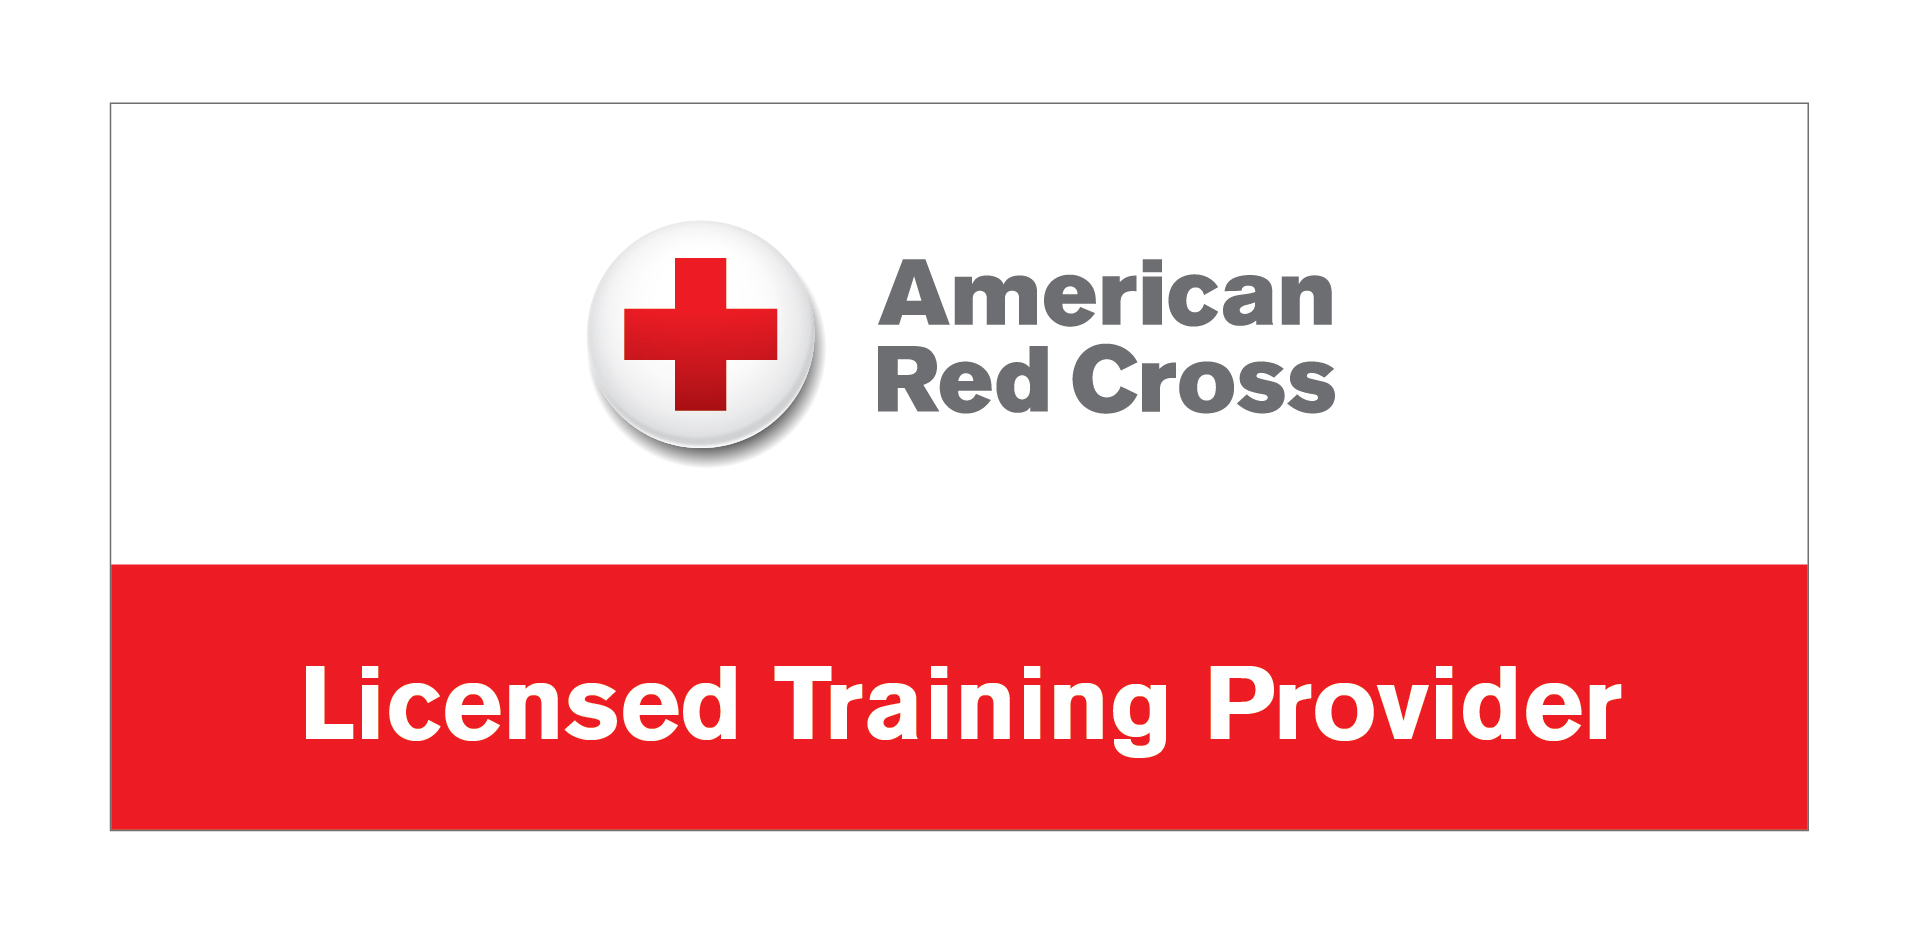 American Red Cross Licensed Training Provider Graphic